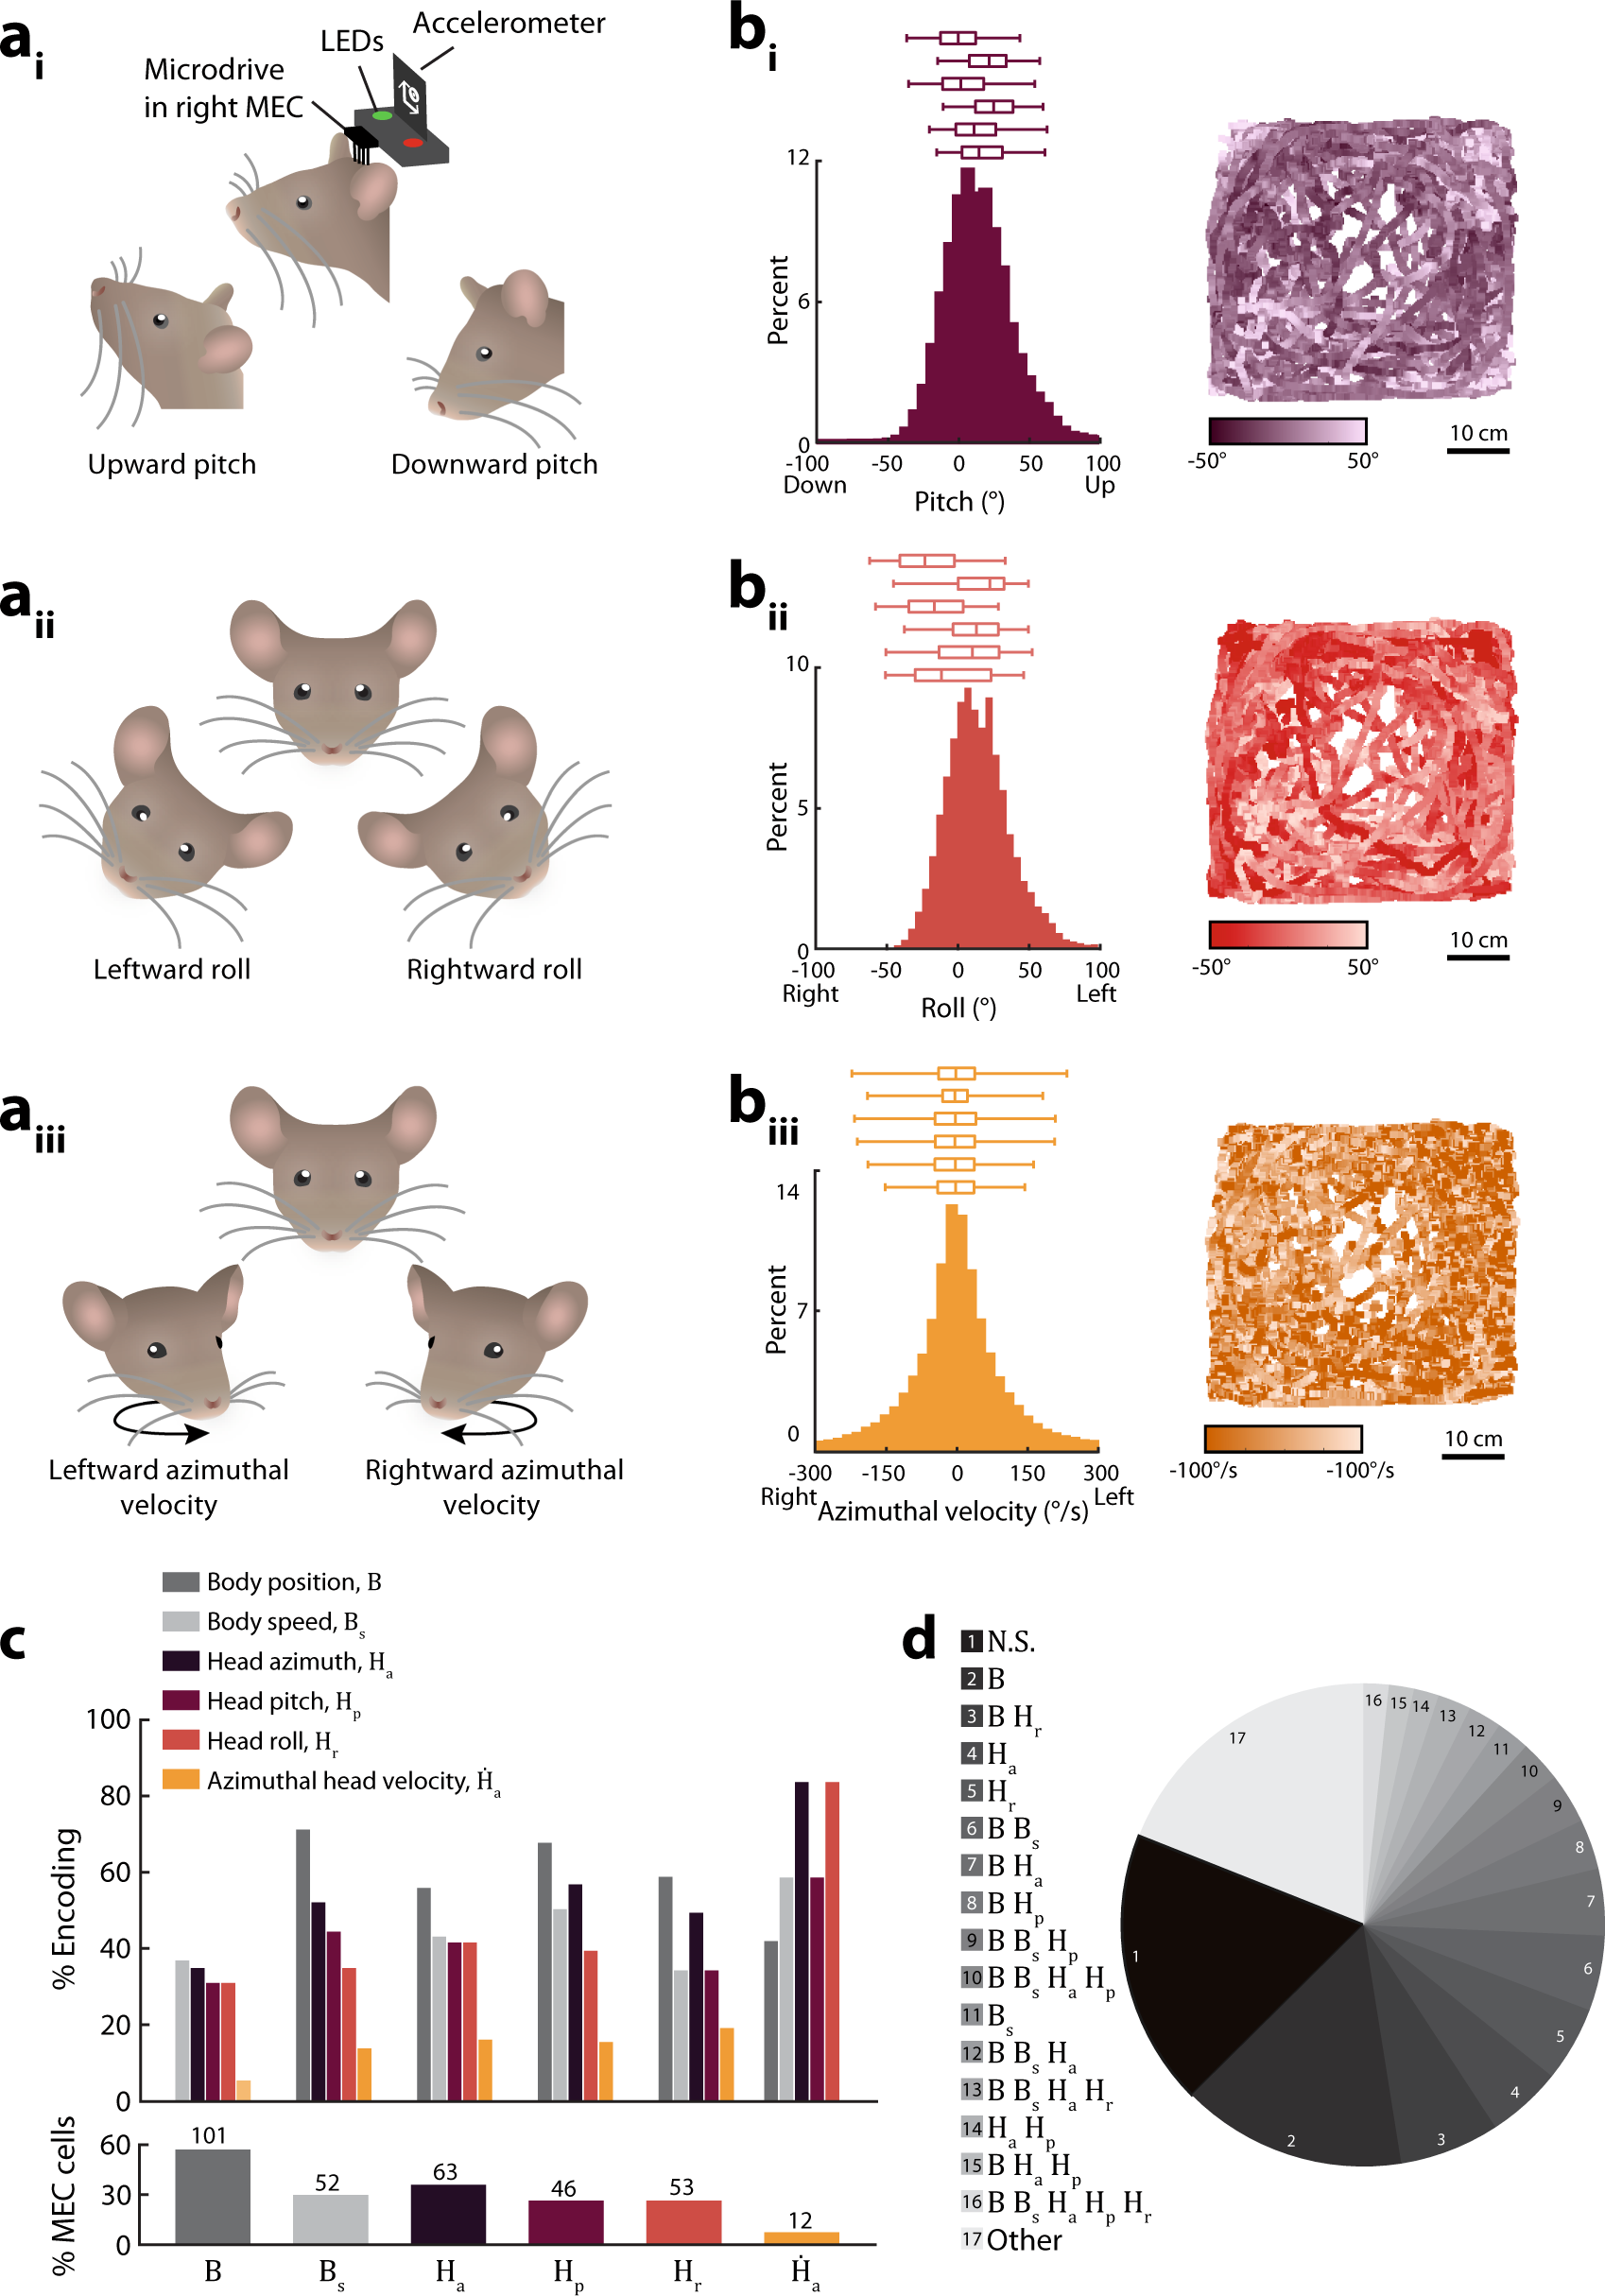 Mouse entorhinal cortex encodes a diverse repertoire of self-motion signals  | Nature Communications